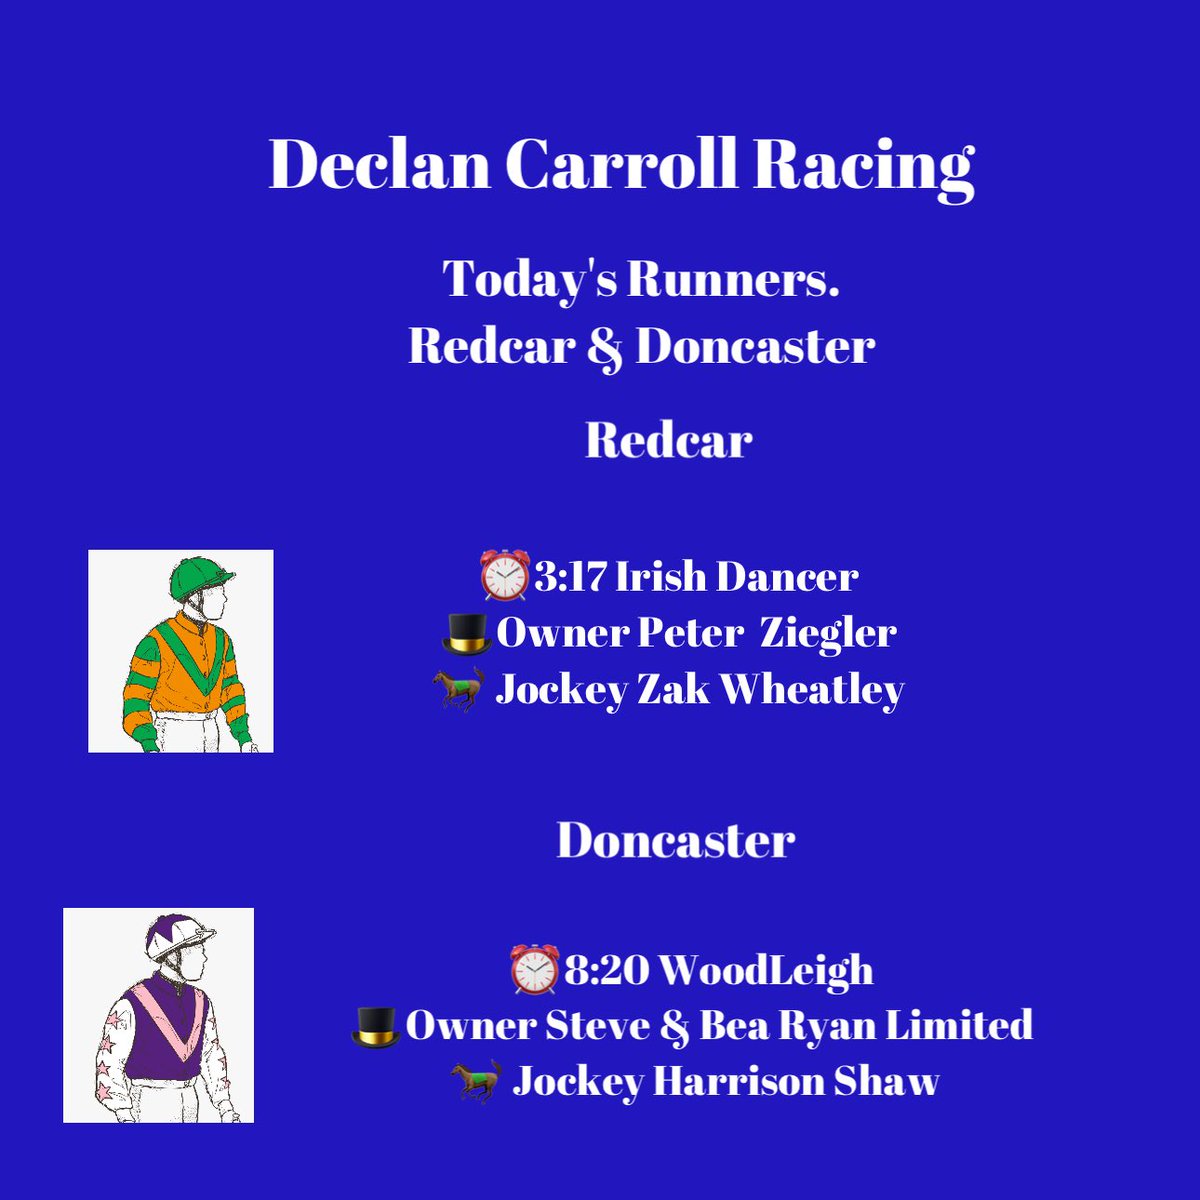 Two runners today @Redcarracing @DoncasterRaces @weeto_10 @shaw_harrison @RacingSantry @freddytylicki @YorkshireRacing